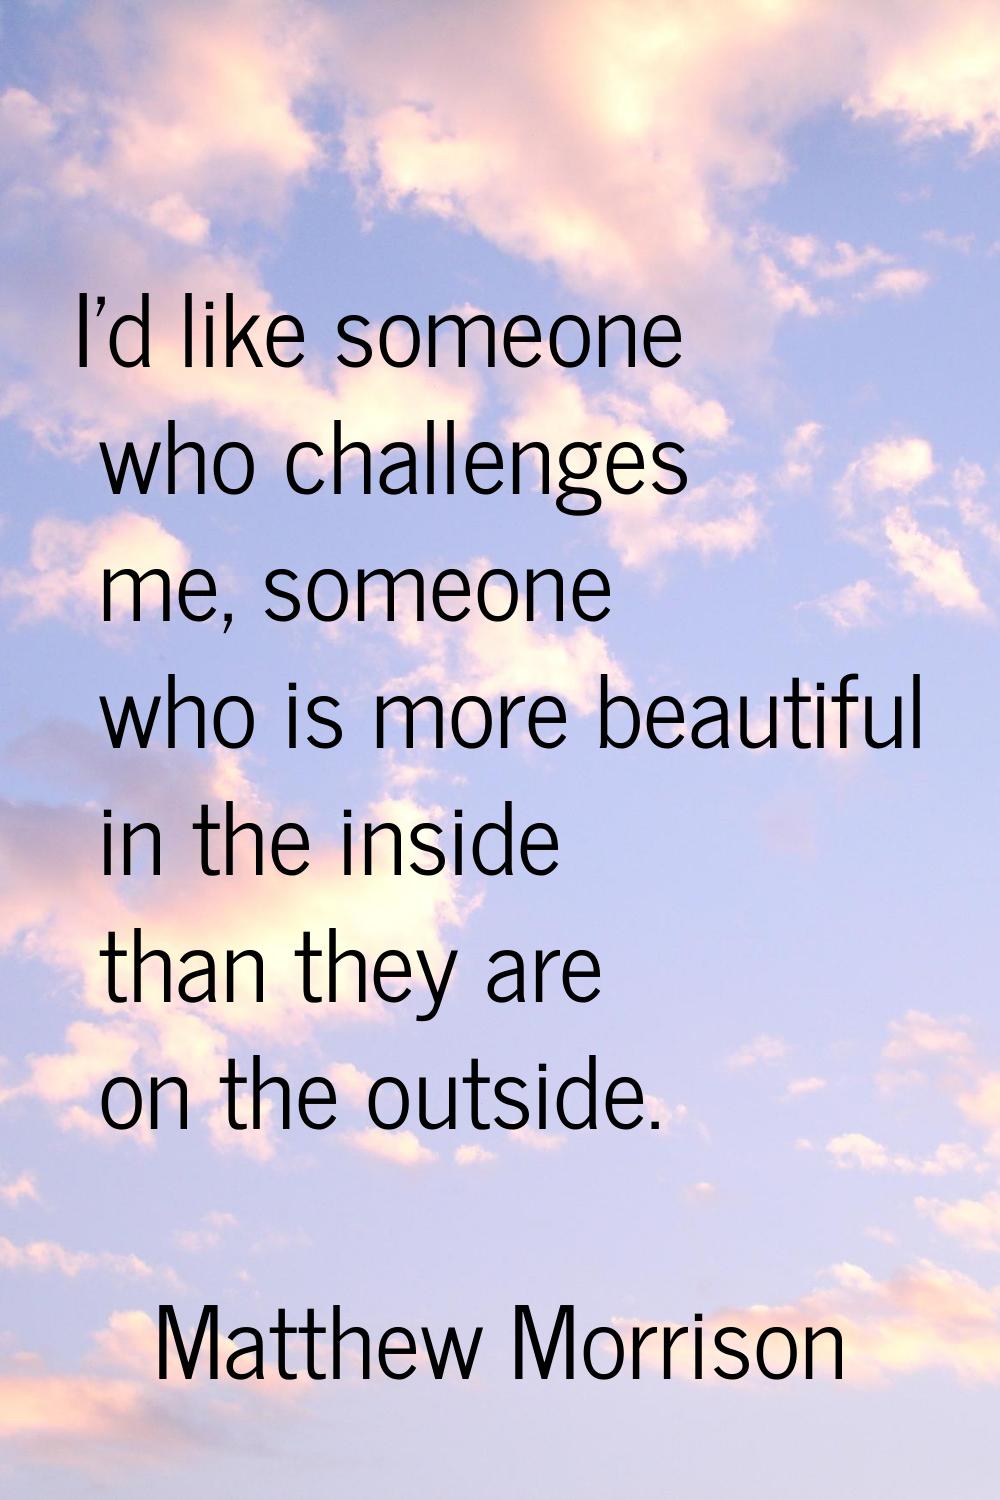 I'd like someone who challenges me, someone who is more beautiful in the inside than they are on th